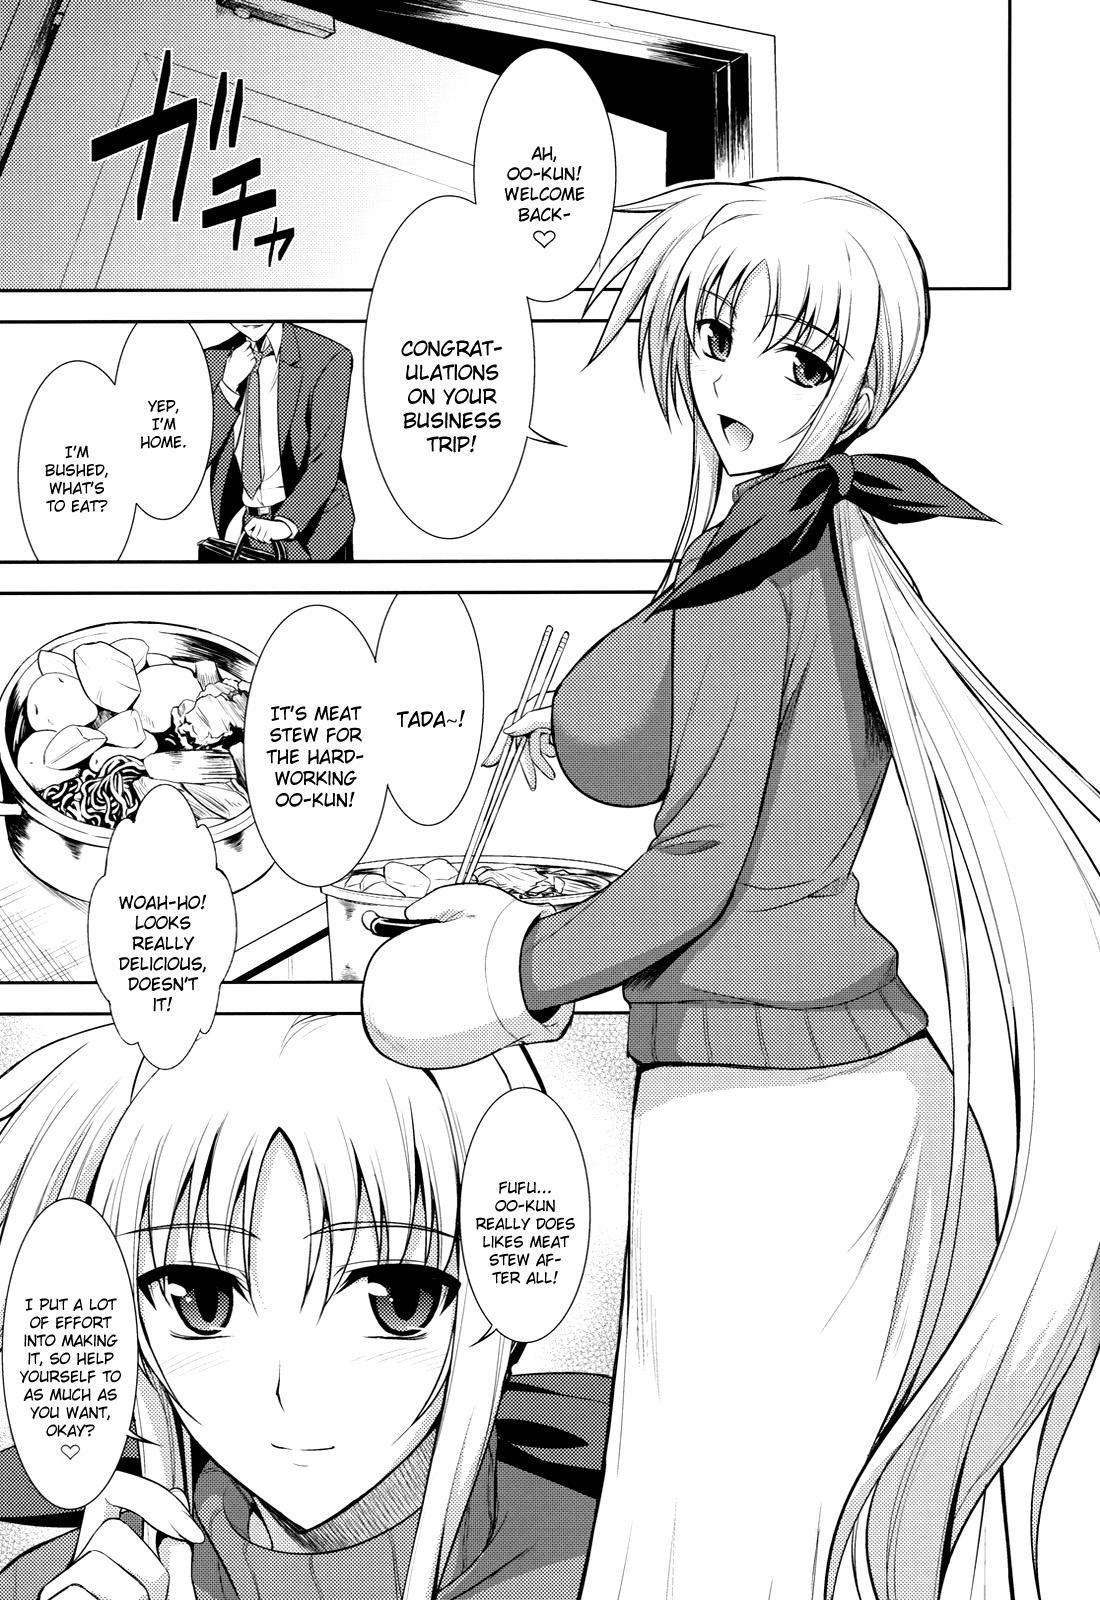 Thot (C79) [Type-G (Ishigaki Takashi)] Ore to Fate to One-room | My and Fate's One-Room (Mahou Shoujo Lyrical Nanoha) [English] =LWB= - Mahou shoujo lyrical nanoha Uncensored - Page 2